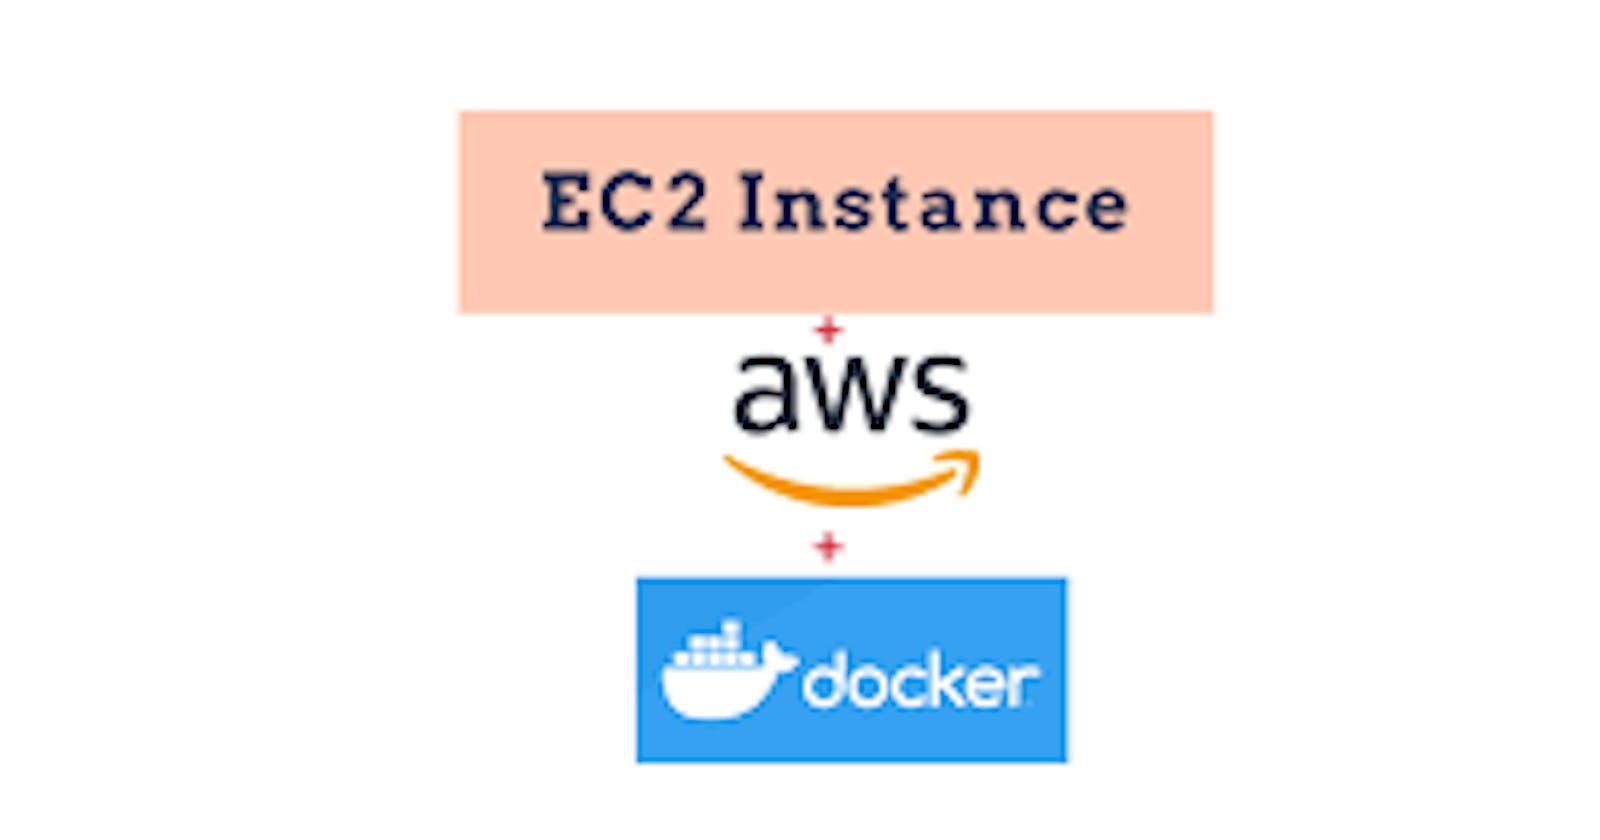 Launch An EC2 Instance of Ubuntu AMI , Enable SSH Port, Create and Attach Pem key and Install Docker, then pull and run default NGINX image in docker.